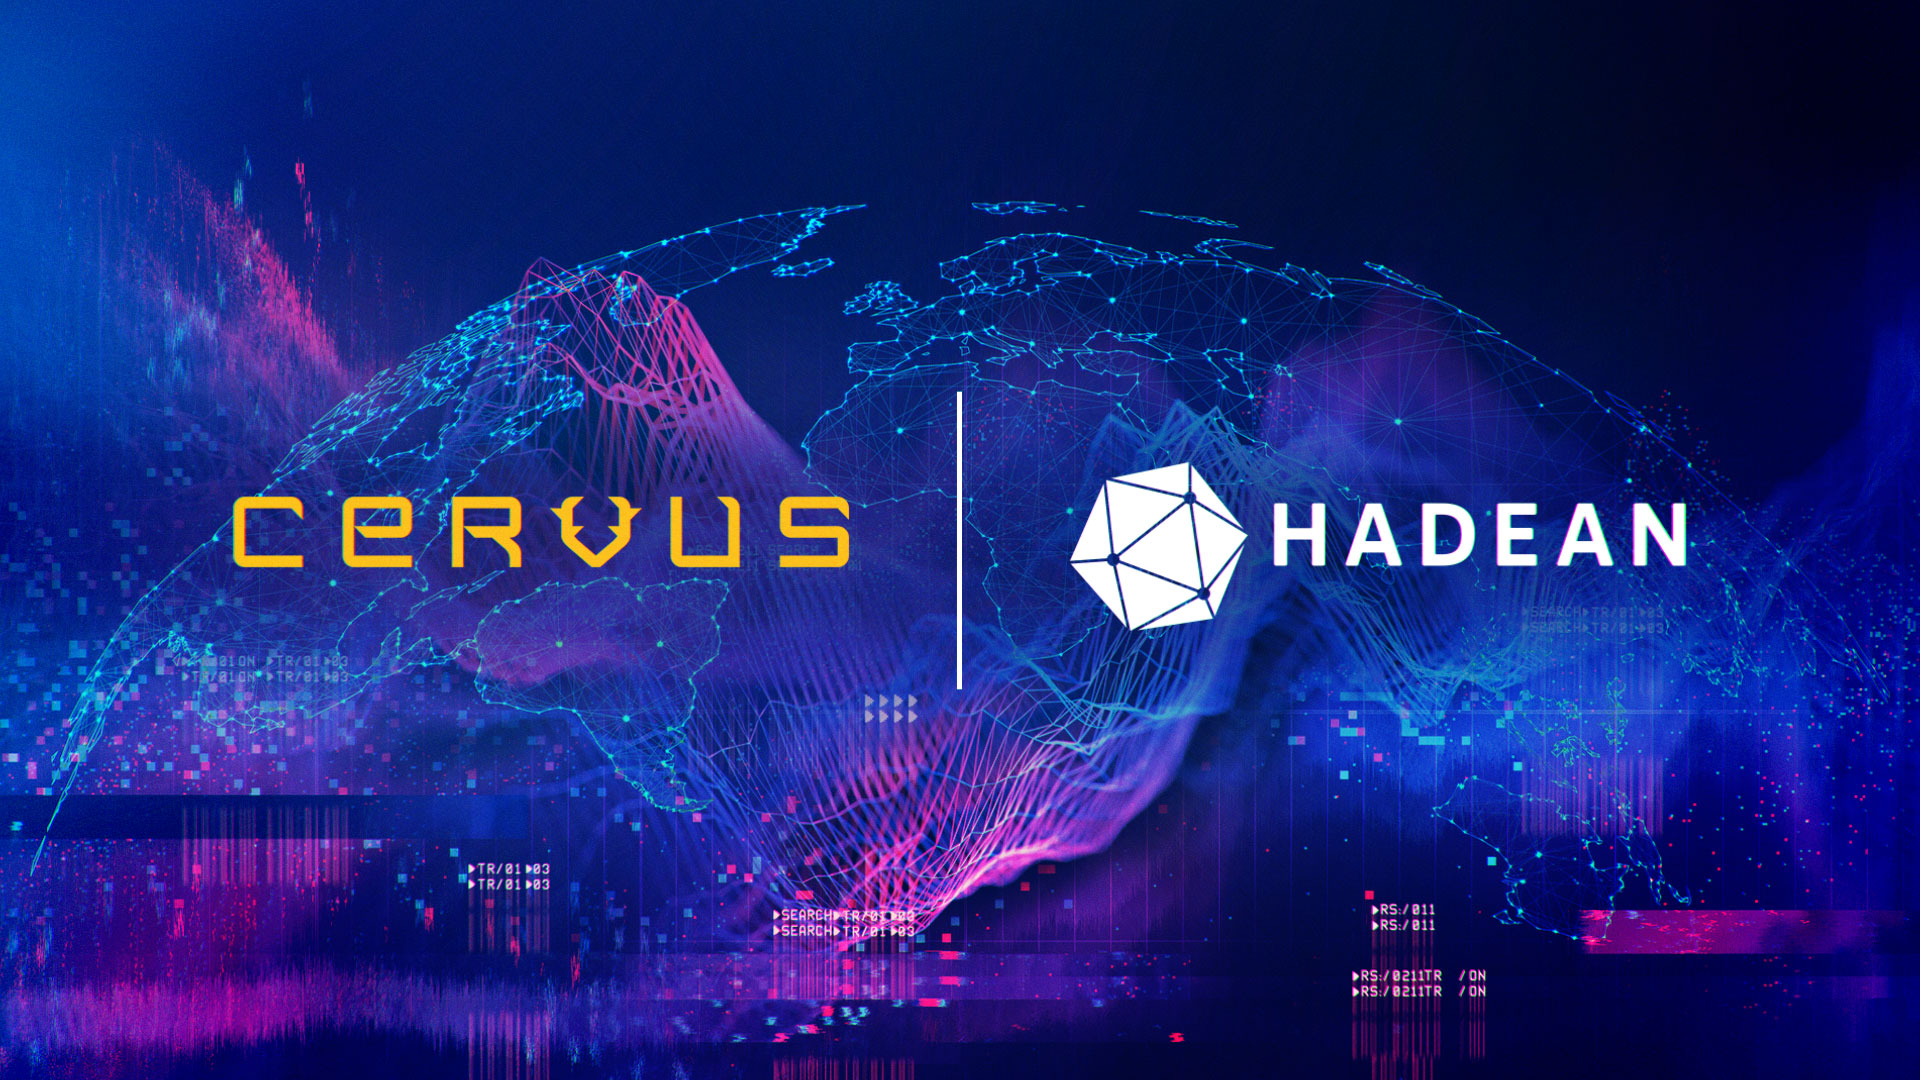 Cervus and Hadean team-up to revolutionise decision support with enhanced cloud-native tool for decision advantage